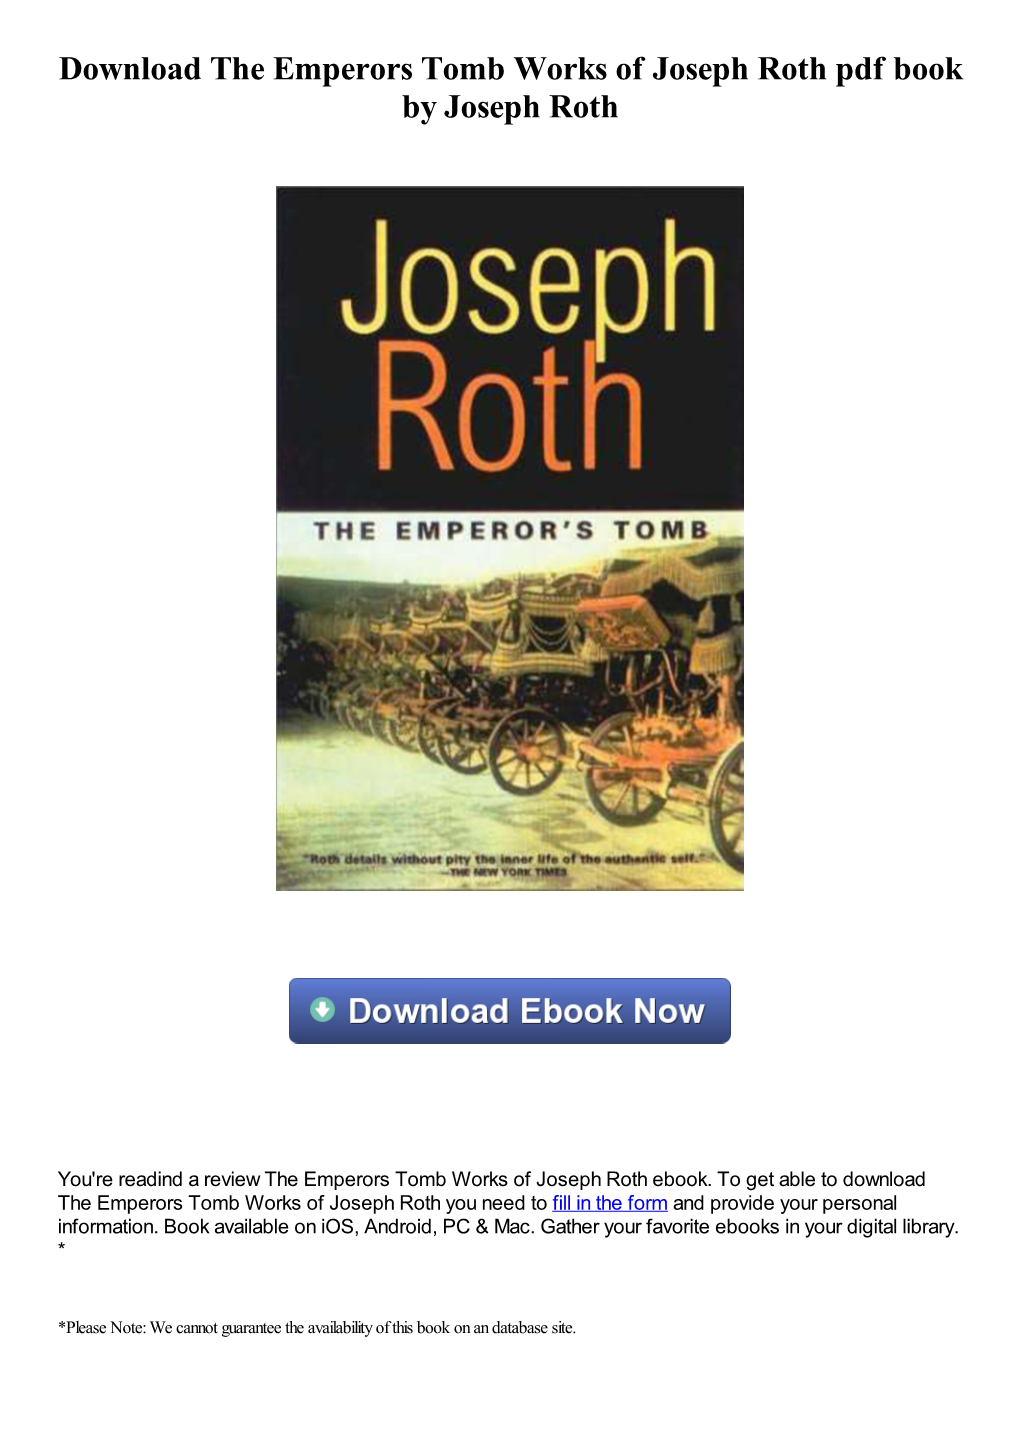 Download the Emperors Tomb Works of Joseph Roth Pdf Ebook By